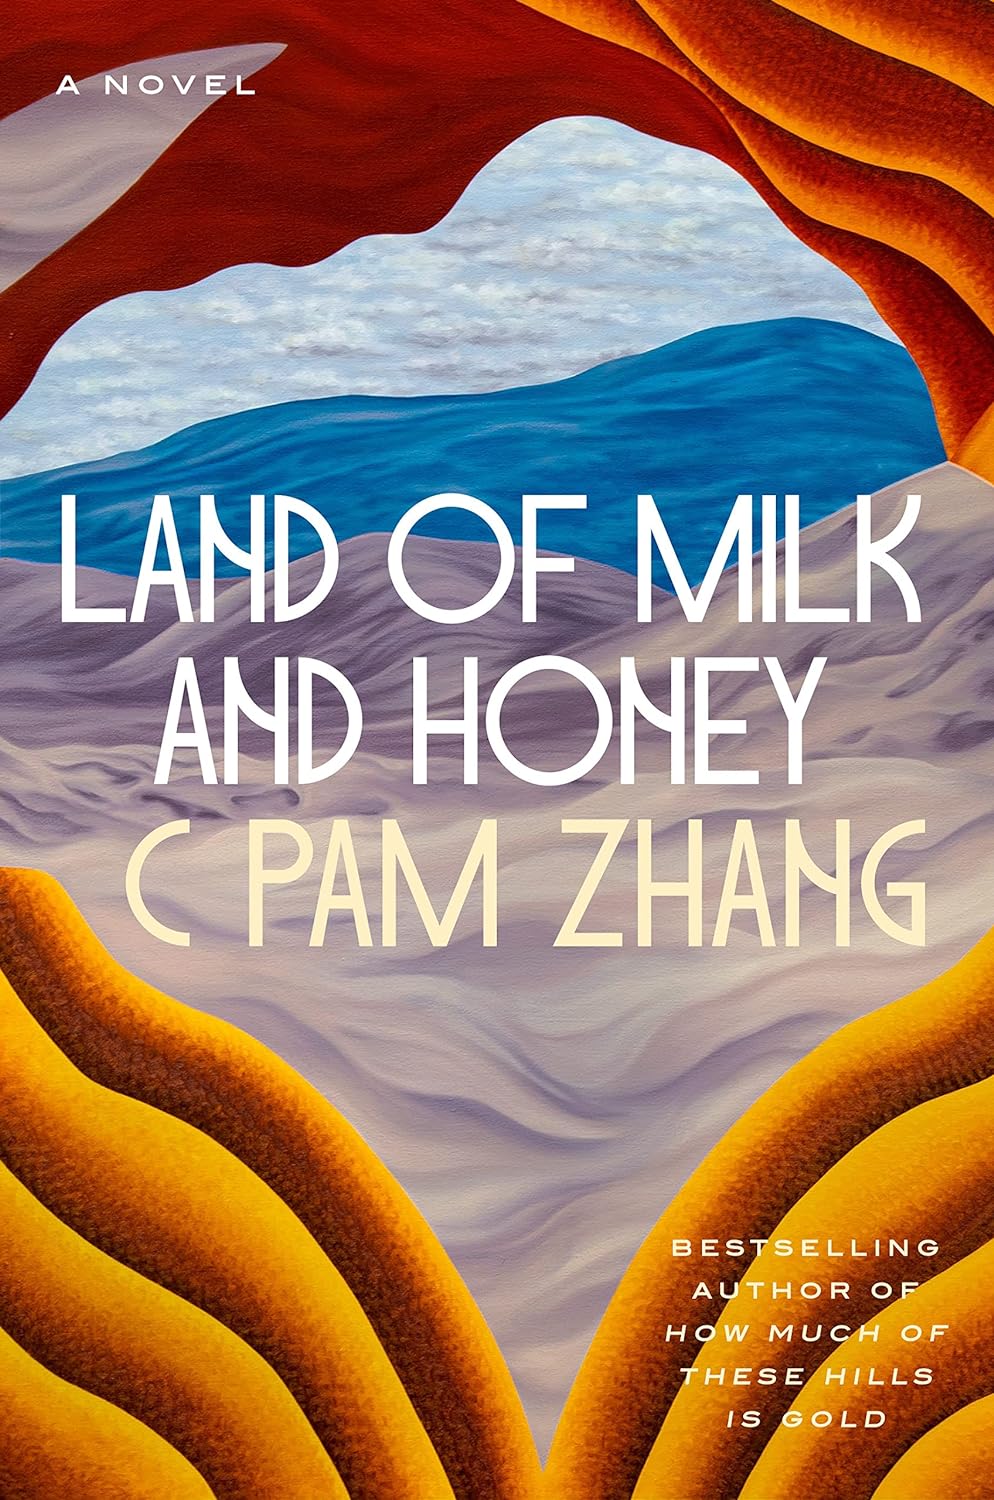 Image for "Land of Milk and Honey"